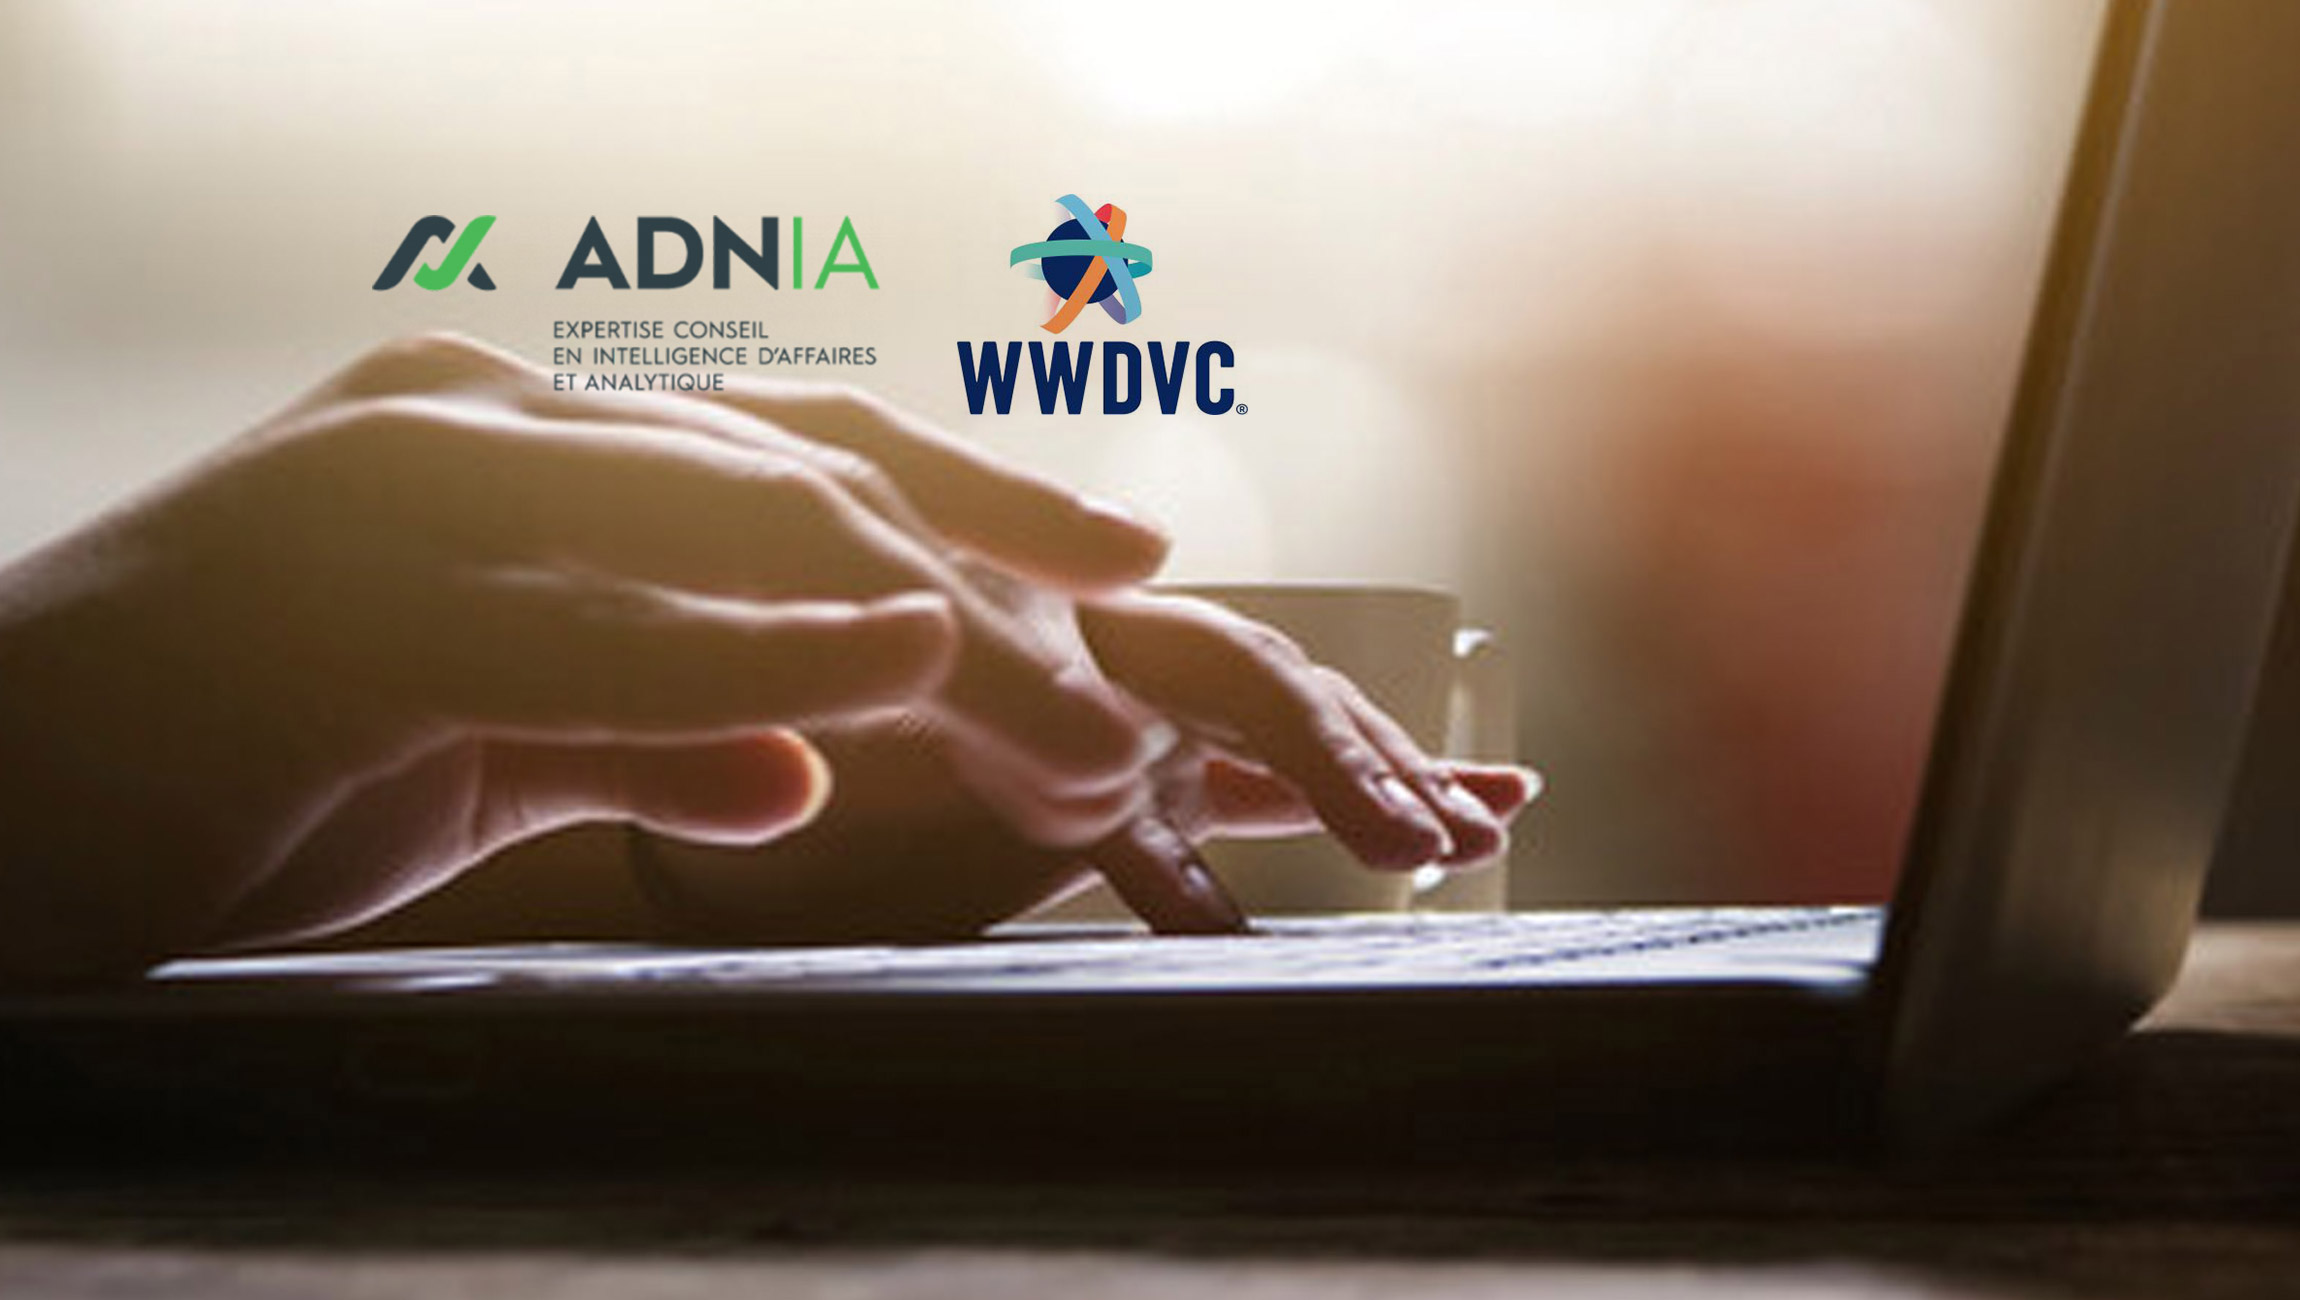 ADNia is BI Leaders to Attend WWDVC 2022 With a Cohort of Data Vault & BI Experts